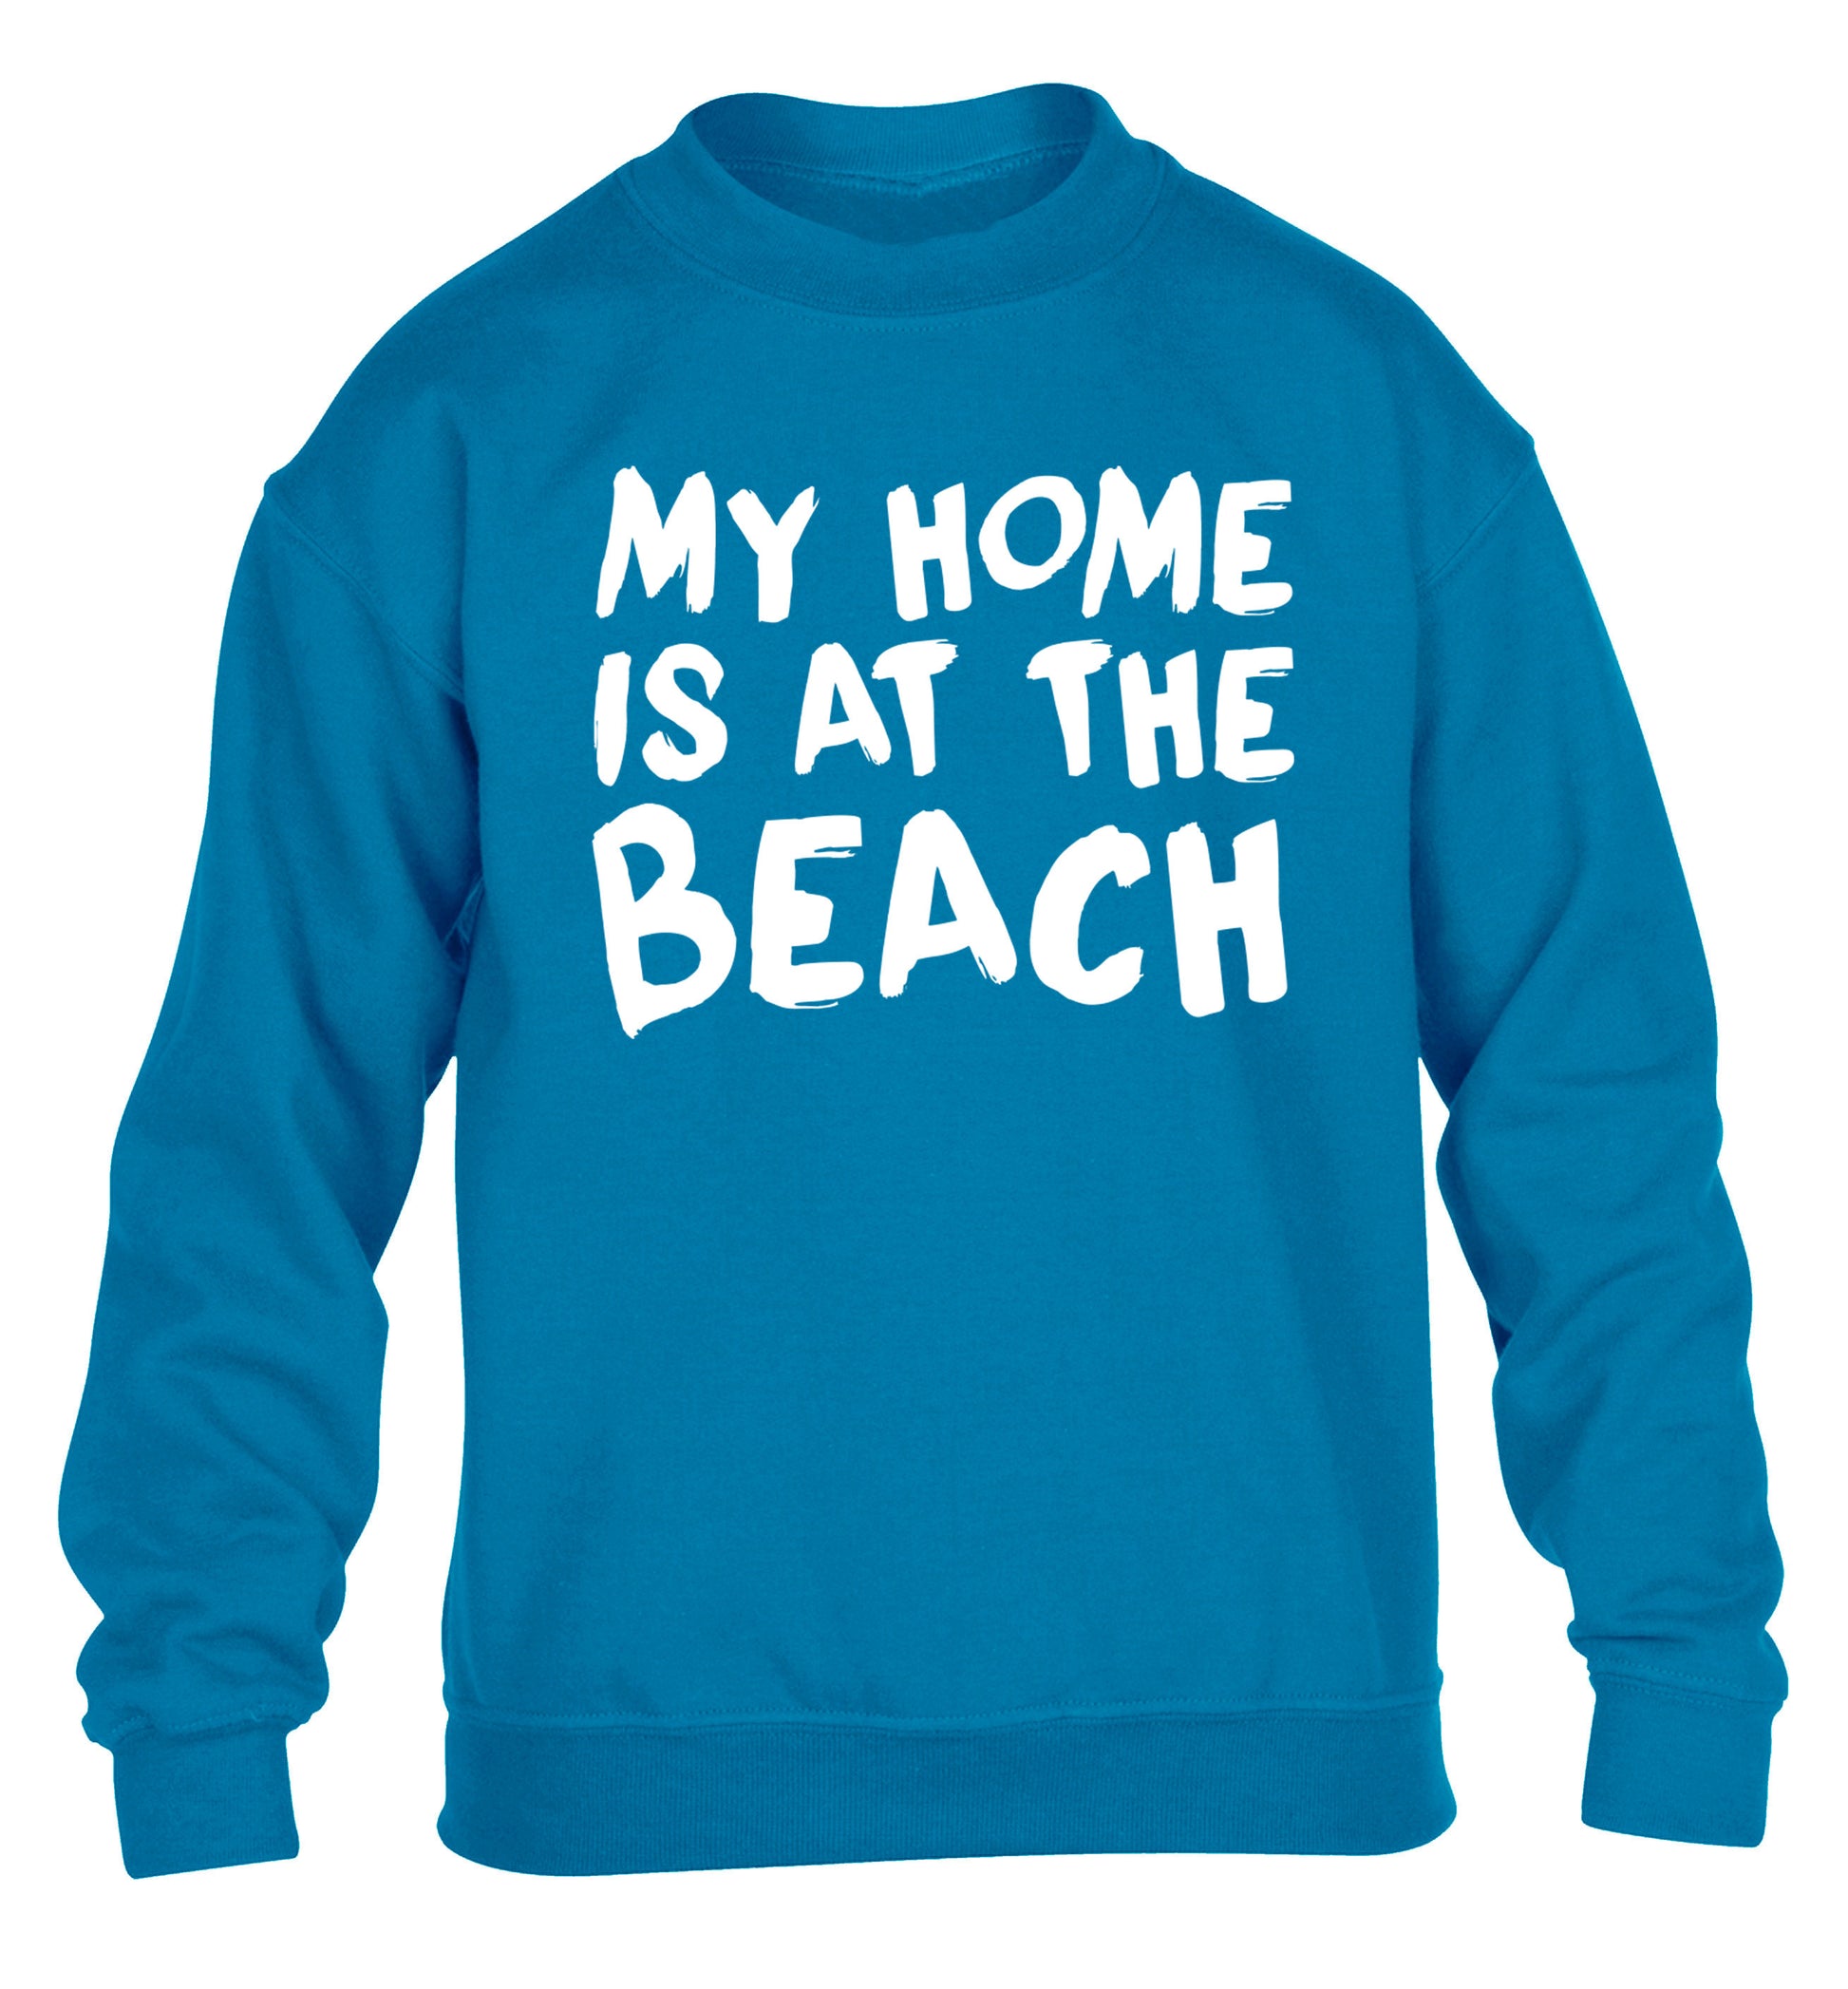 My home is at the beach children's blue sweater 12-14 Years